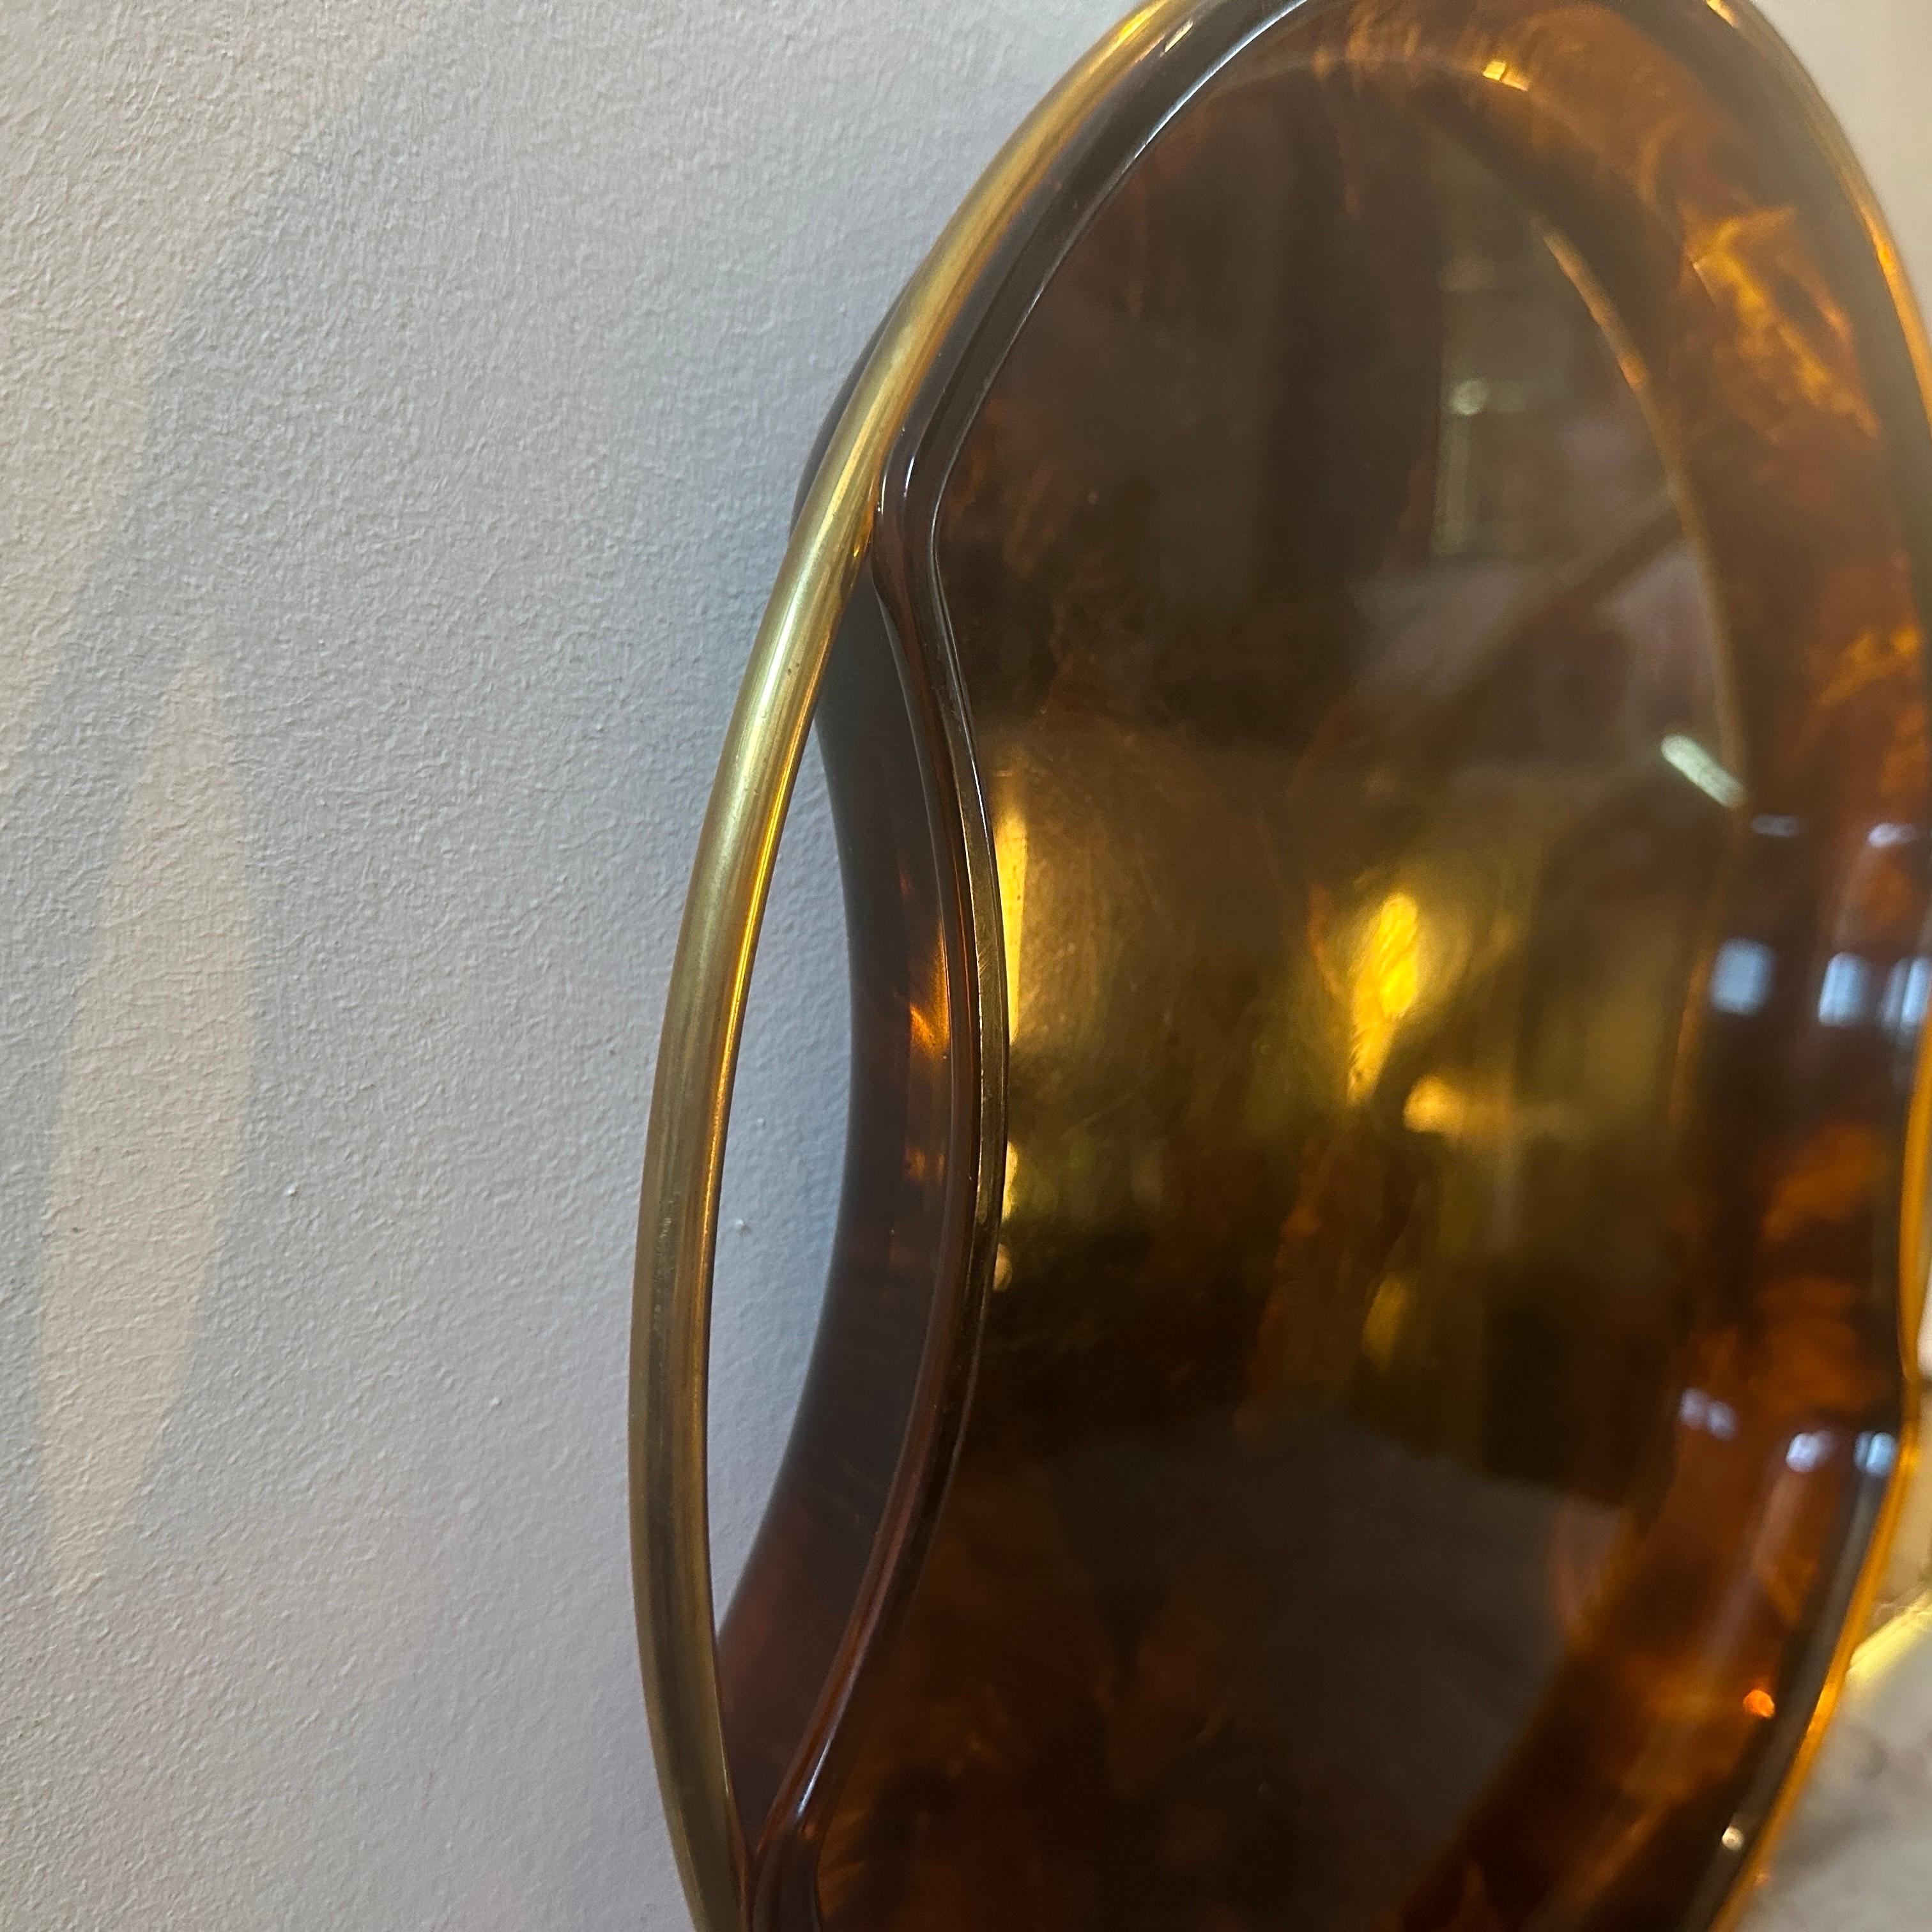 1970s Mid-Century Modern Brass and Fake Tortoise Lucite Round Tray by Guzzini For Sale 2